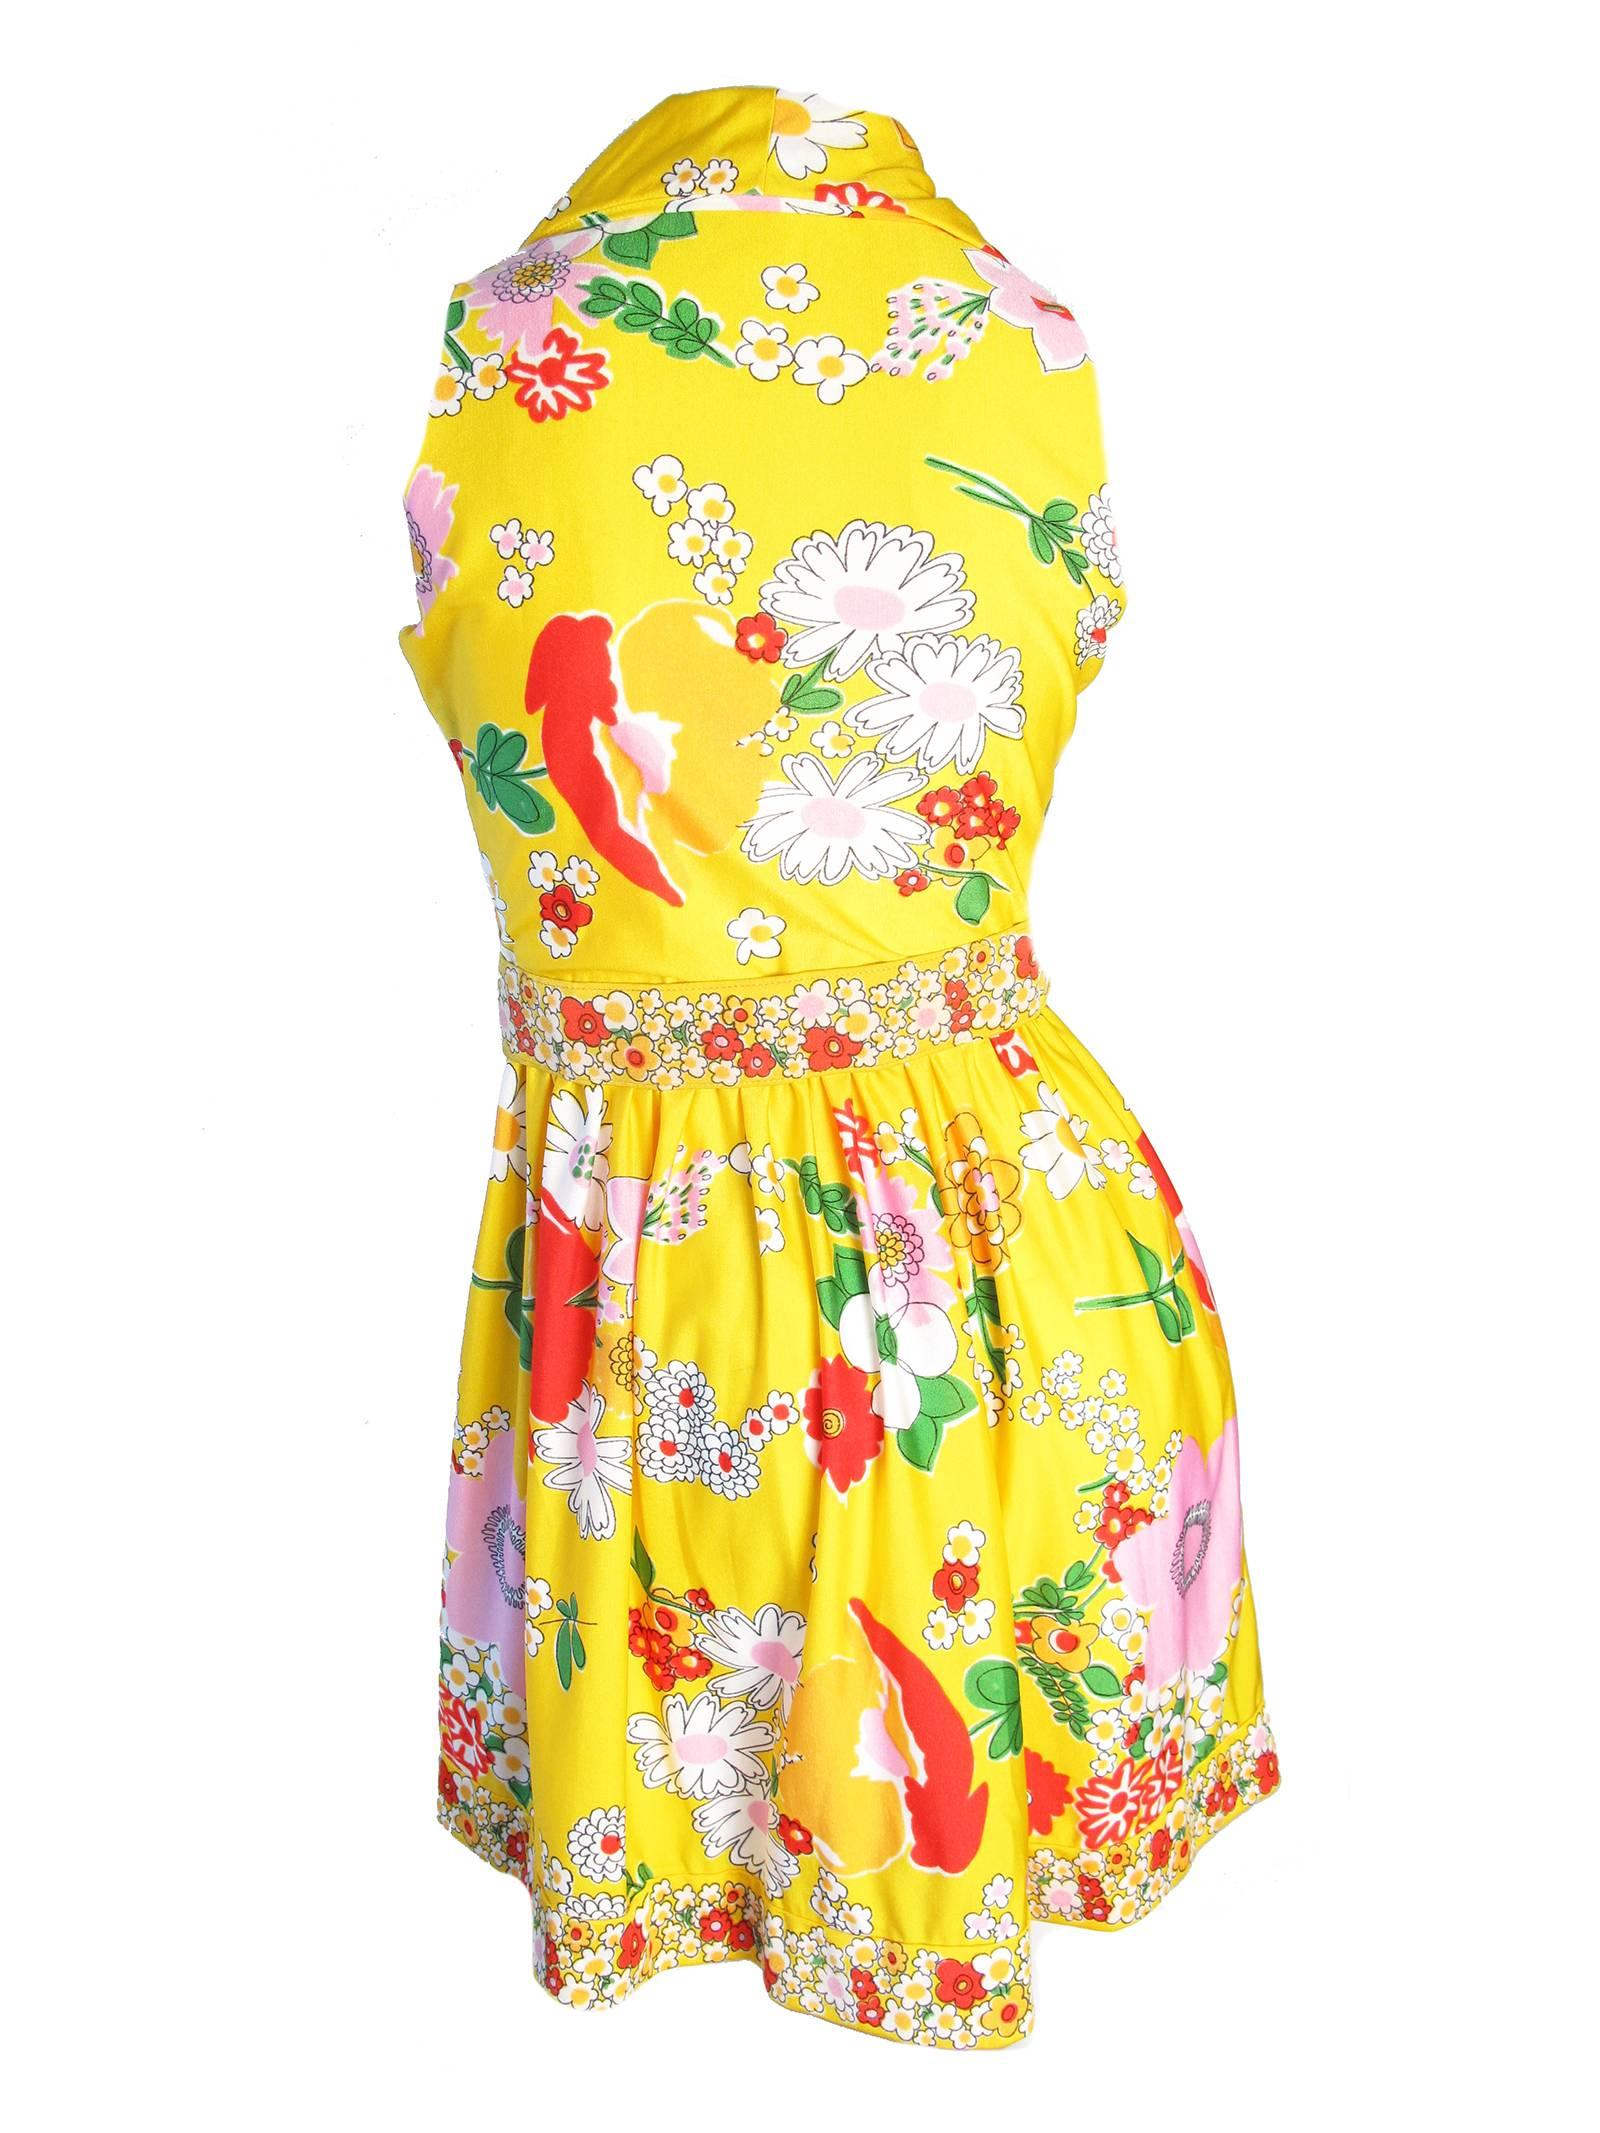 1970s Oscar de la Renta yellow floral mini dress, buttons down front.  With removable belt.  Condition: Excellent . Size Small


We accept returns for refund, please see our terms.  We offer free ground shipping within the US. 